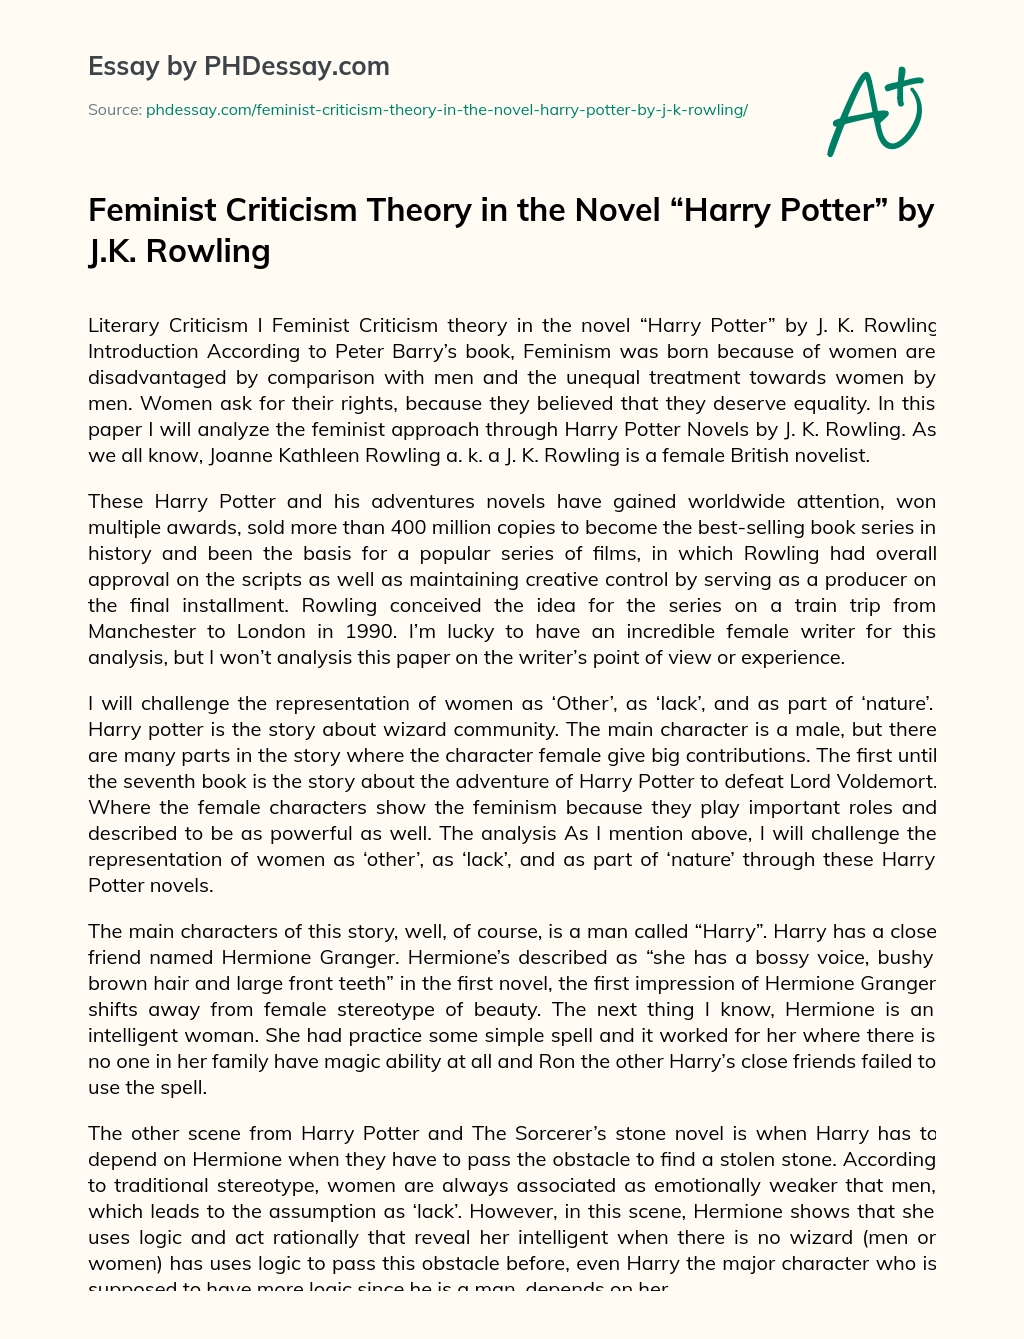 Feminist Criticism Theory in the Novel “Harry Potter” by J.K. Rowling essay